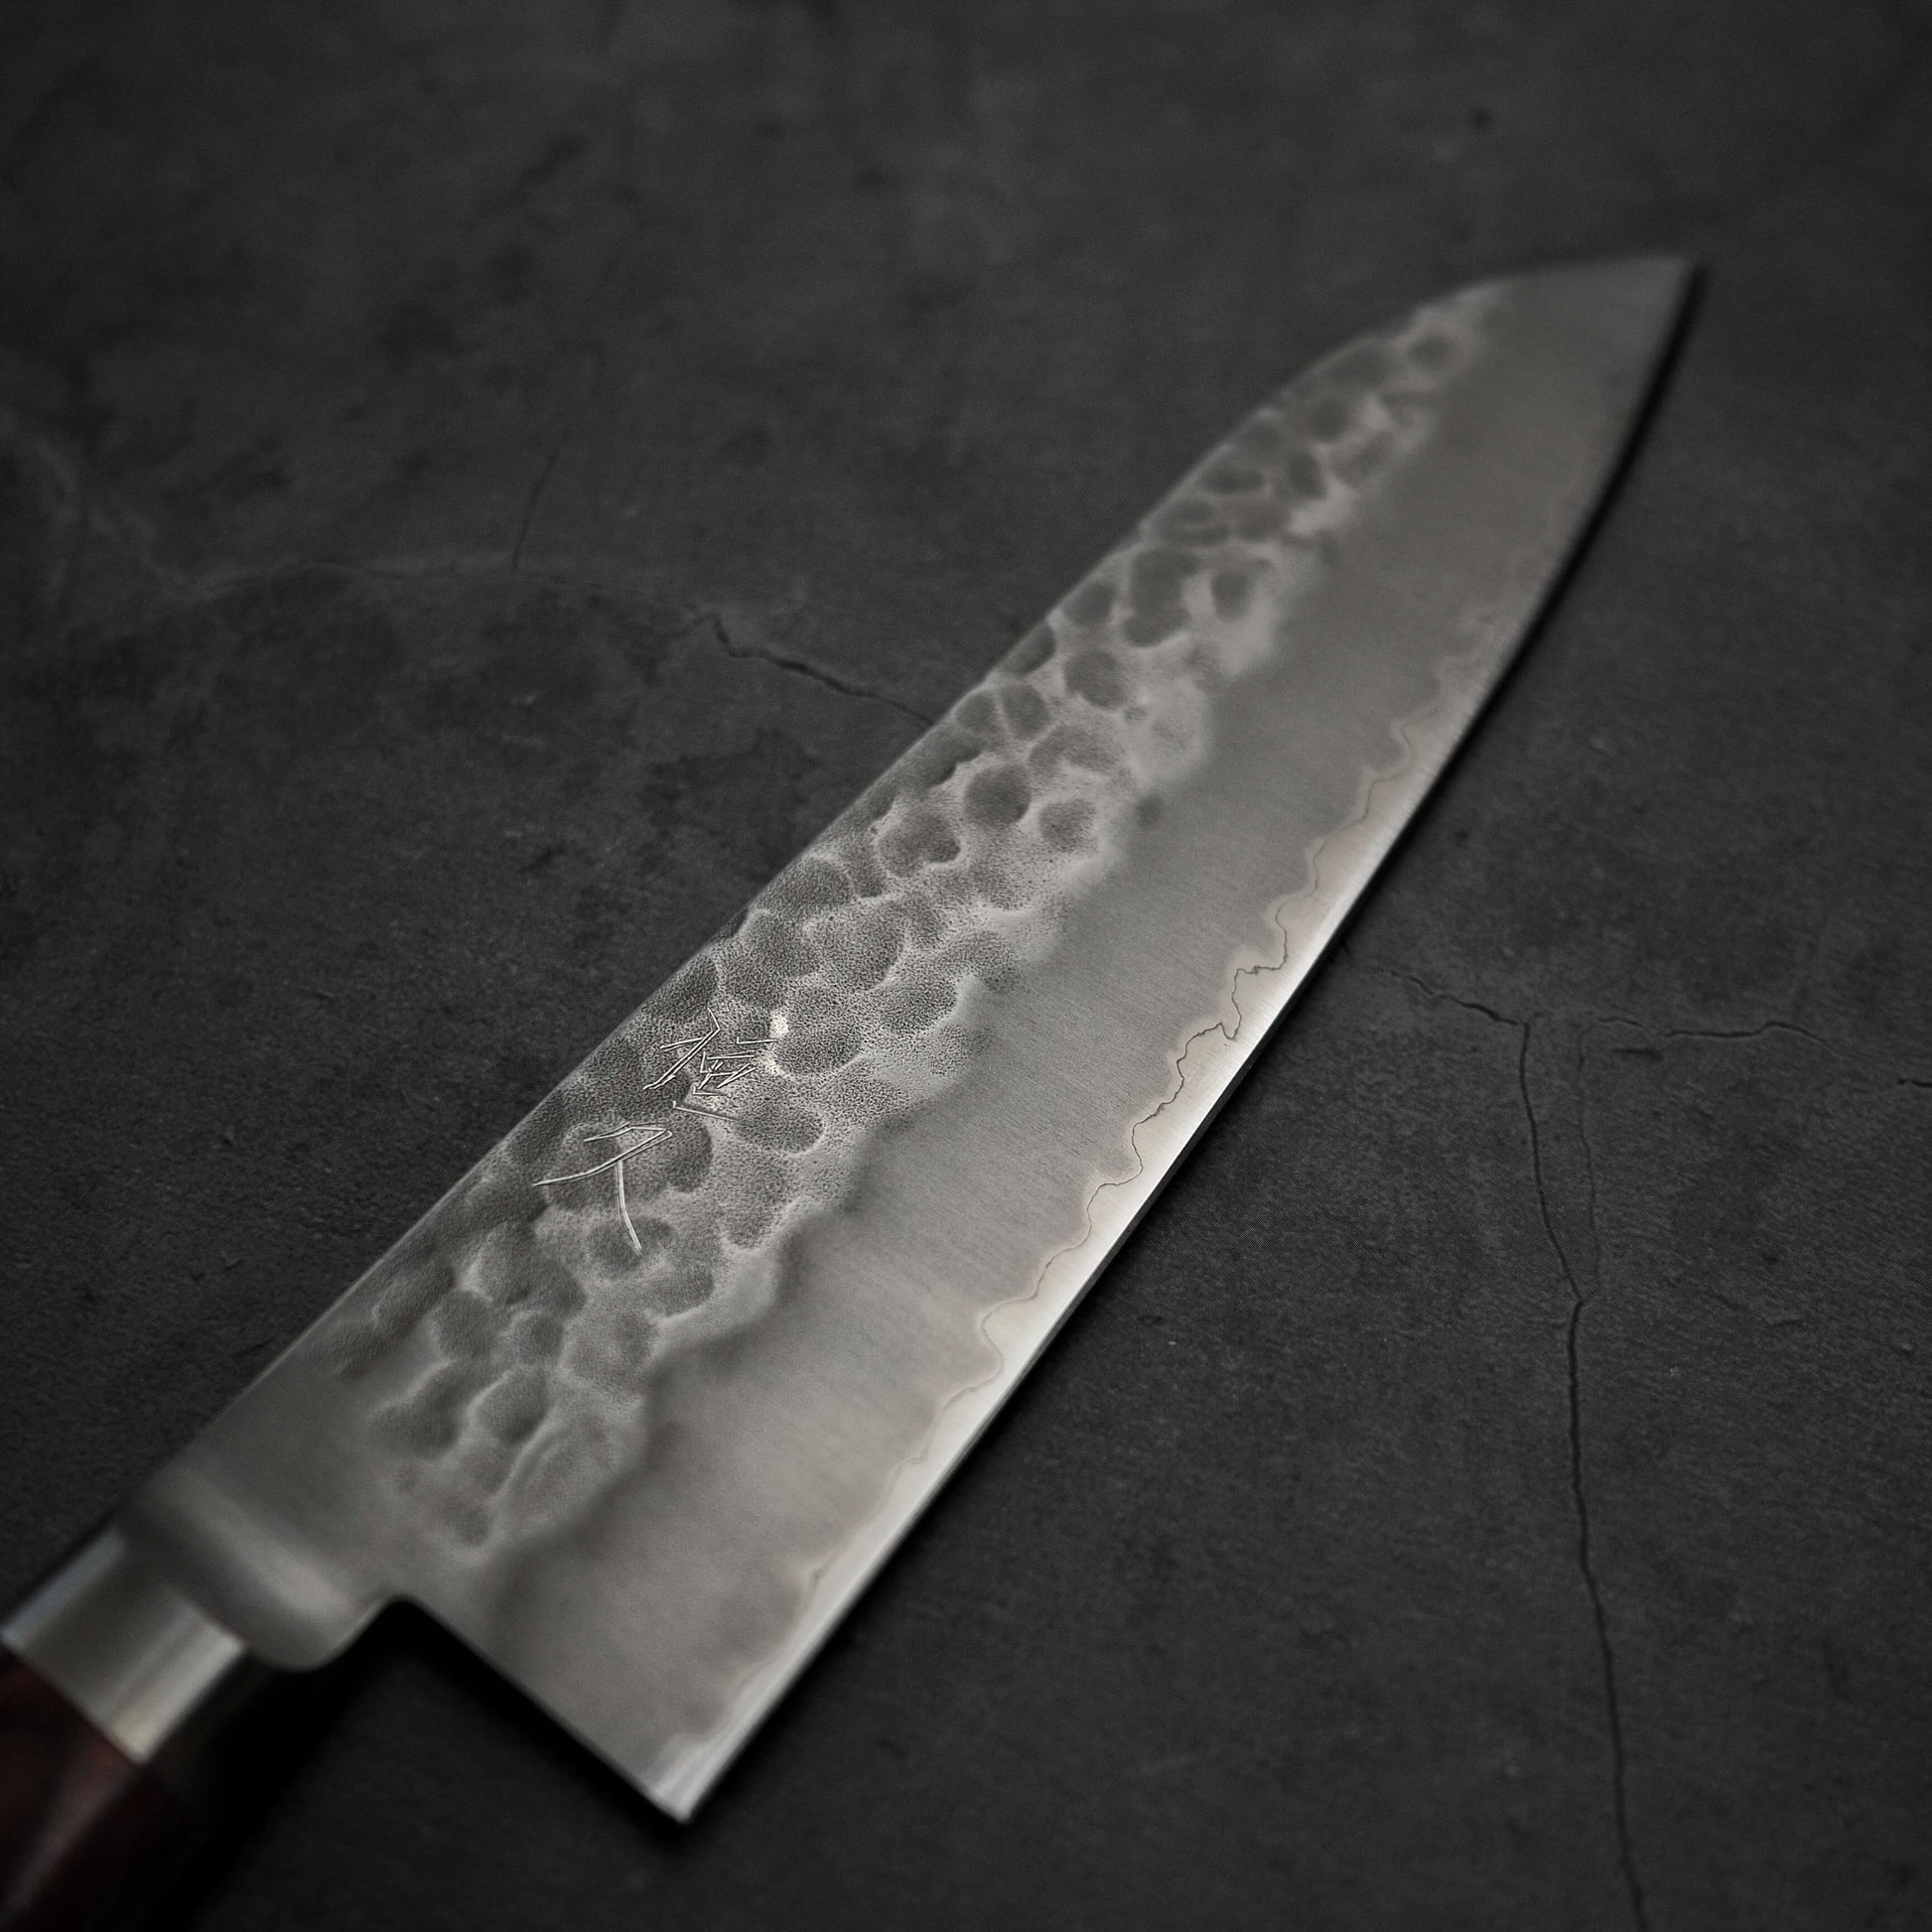 Top view of the blade of Tsunehisa tsuchime aogami super santoku 180mm. Image focuses on the right side of the knife.